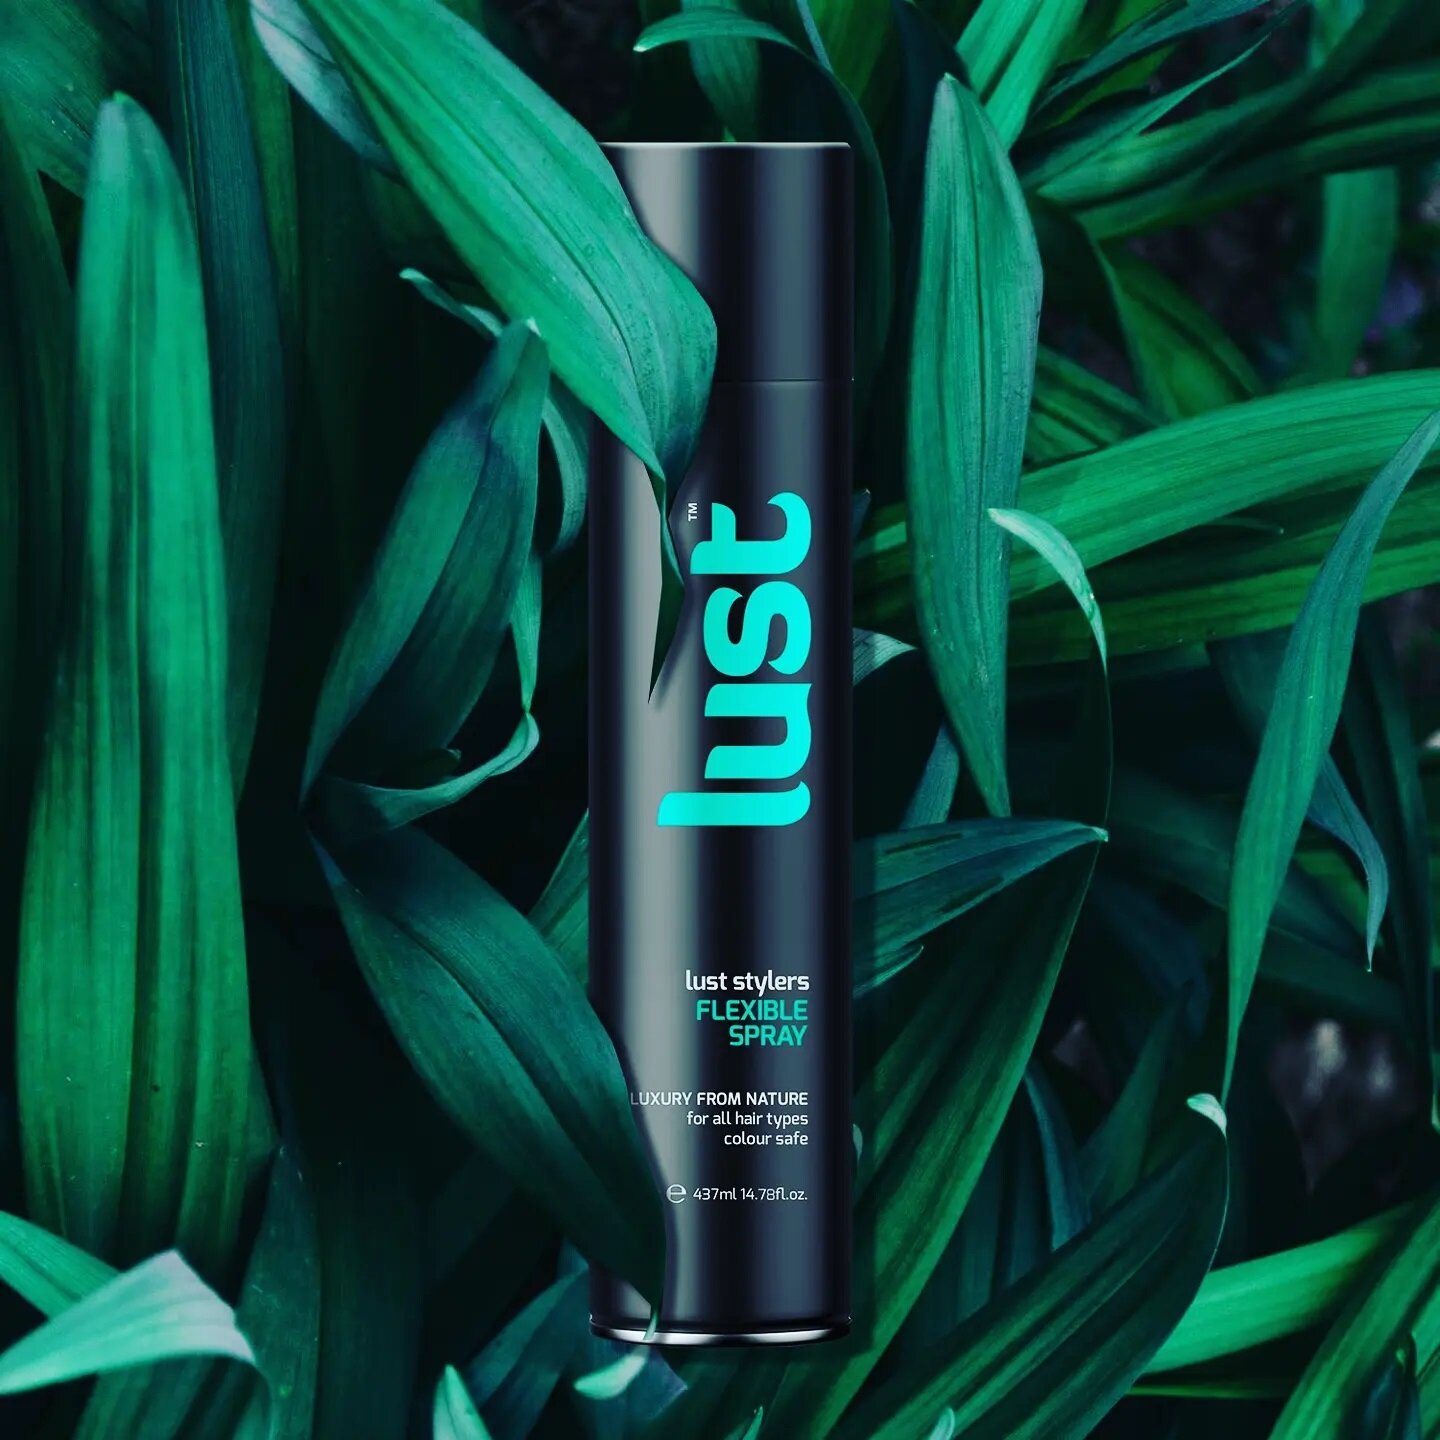 Our Flexible Spray will help shape, control and add texture without weighing your hair down.  It is a great product to use to add volume to fine hair or just as a finishing spray for all hair types. Infused with olive and bamboo leave extracts, chin 